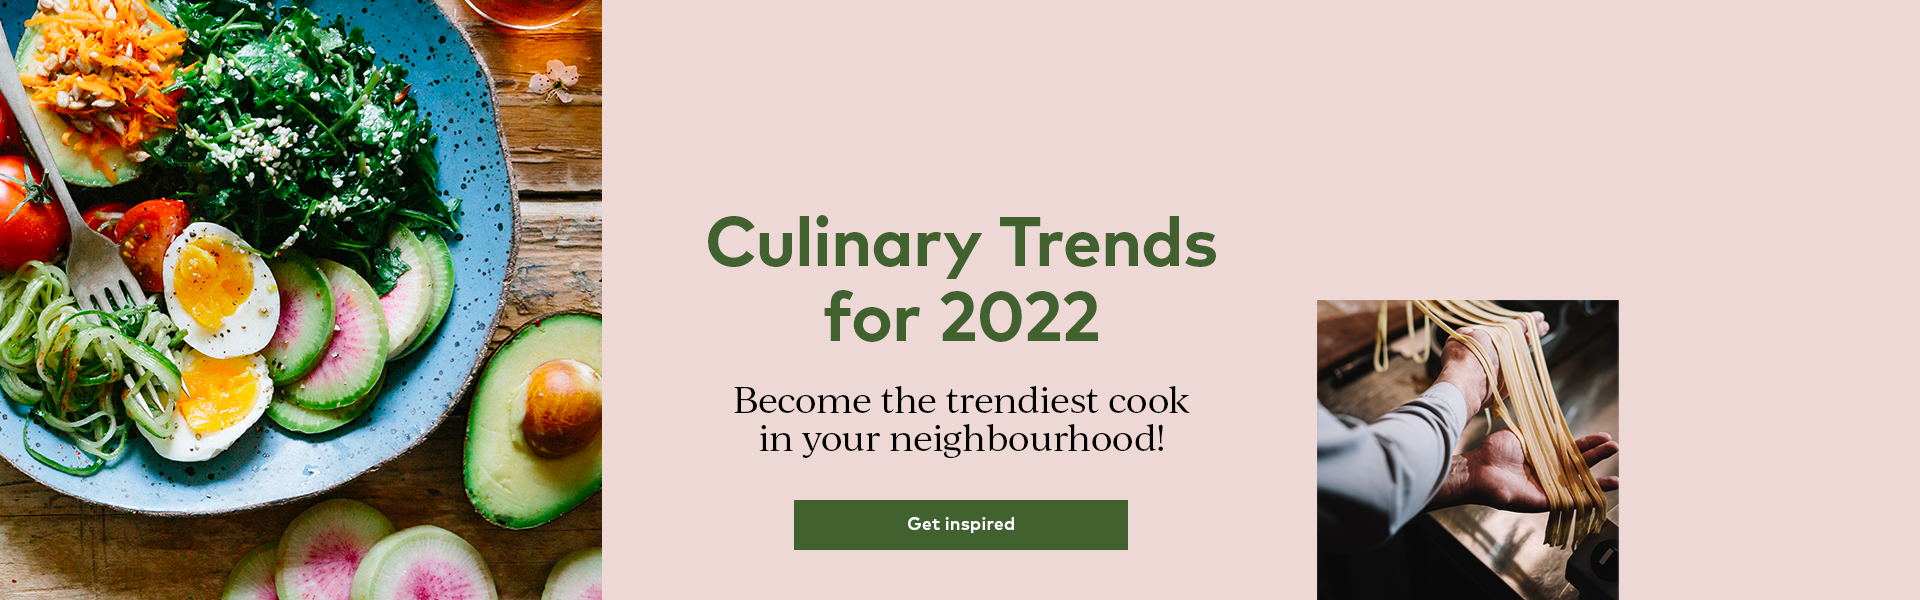 Culinary trends for 2022